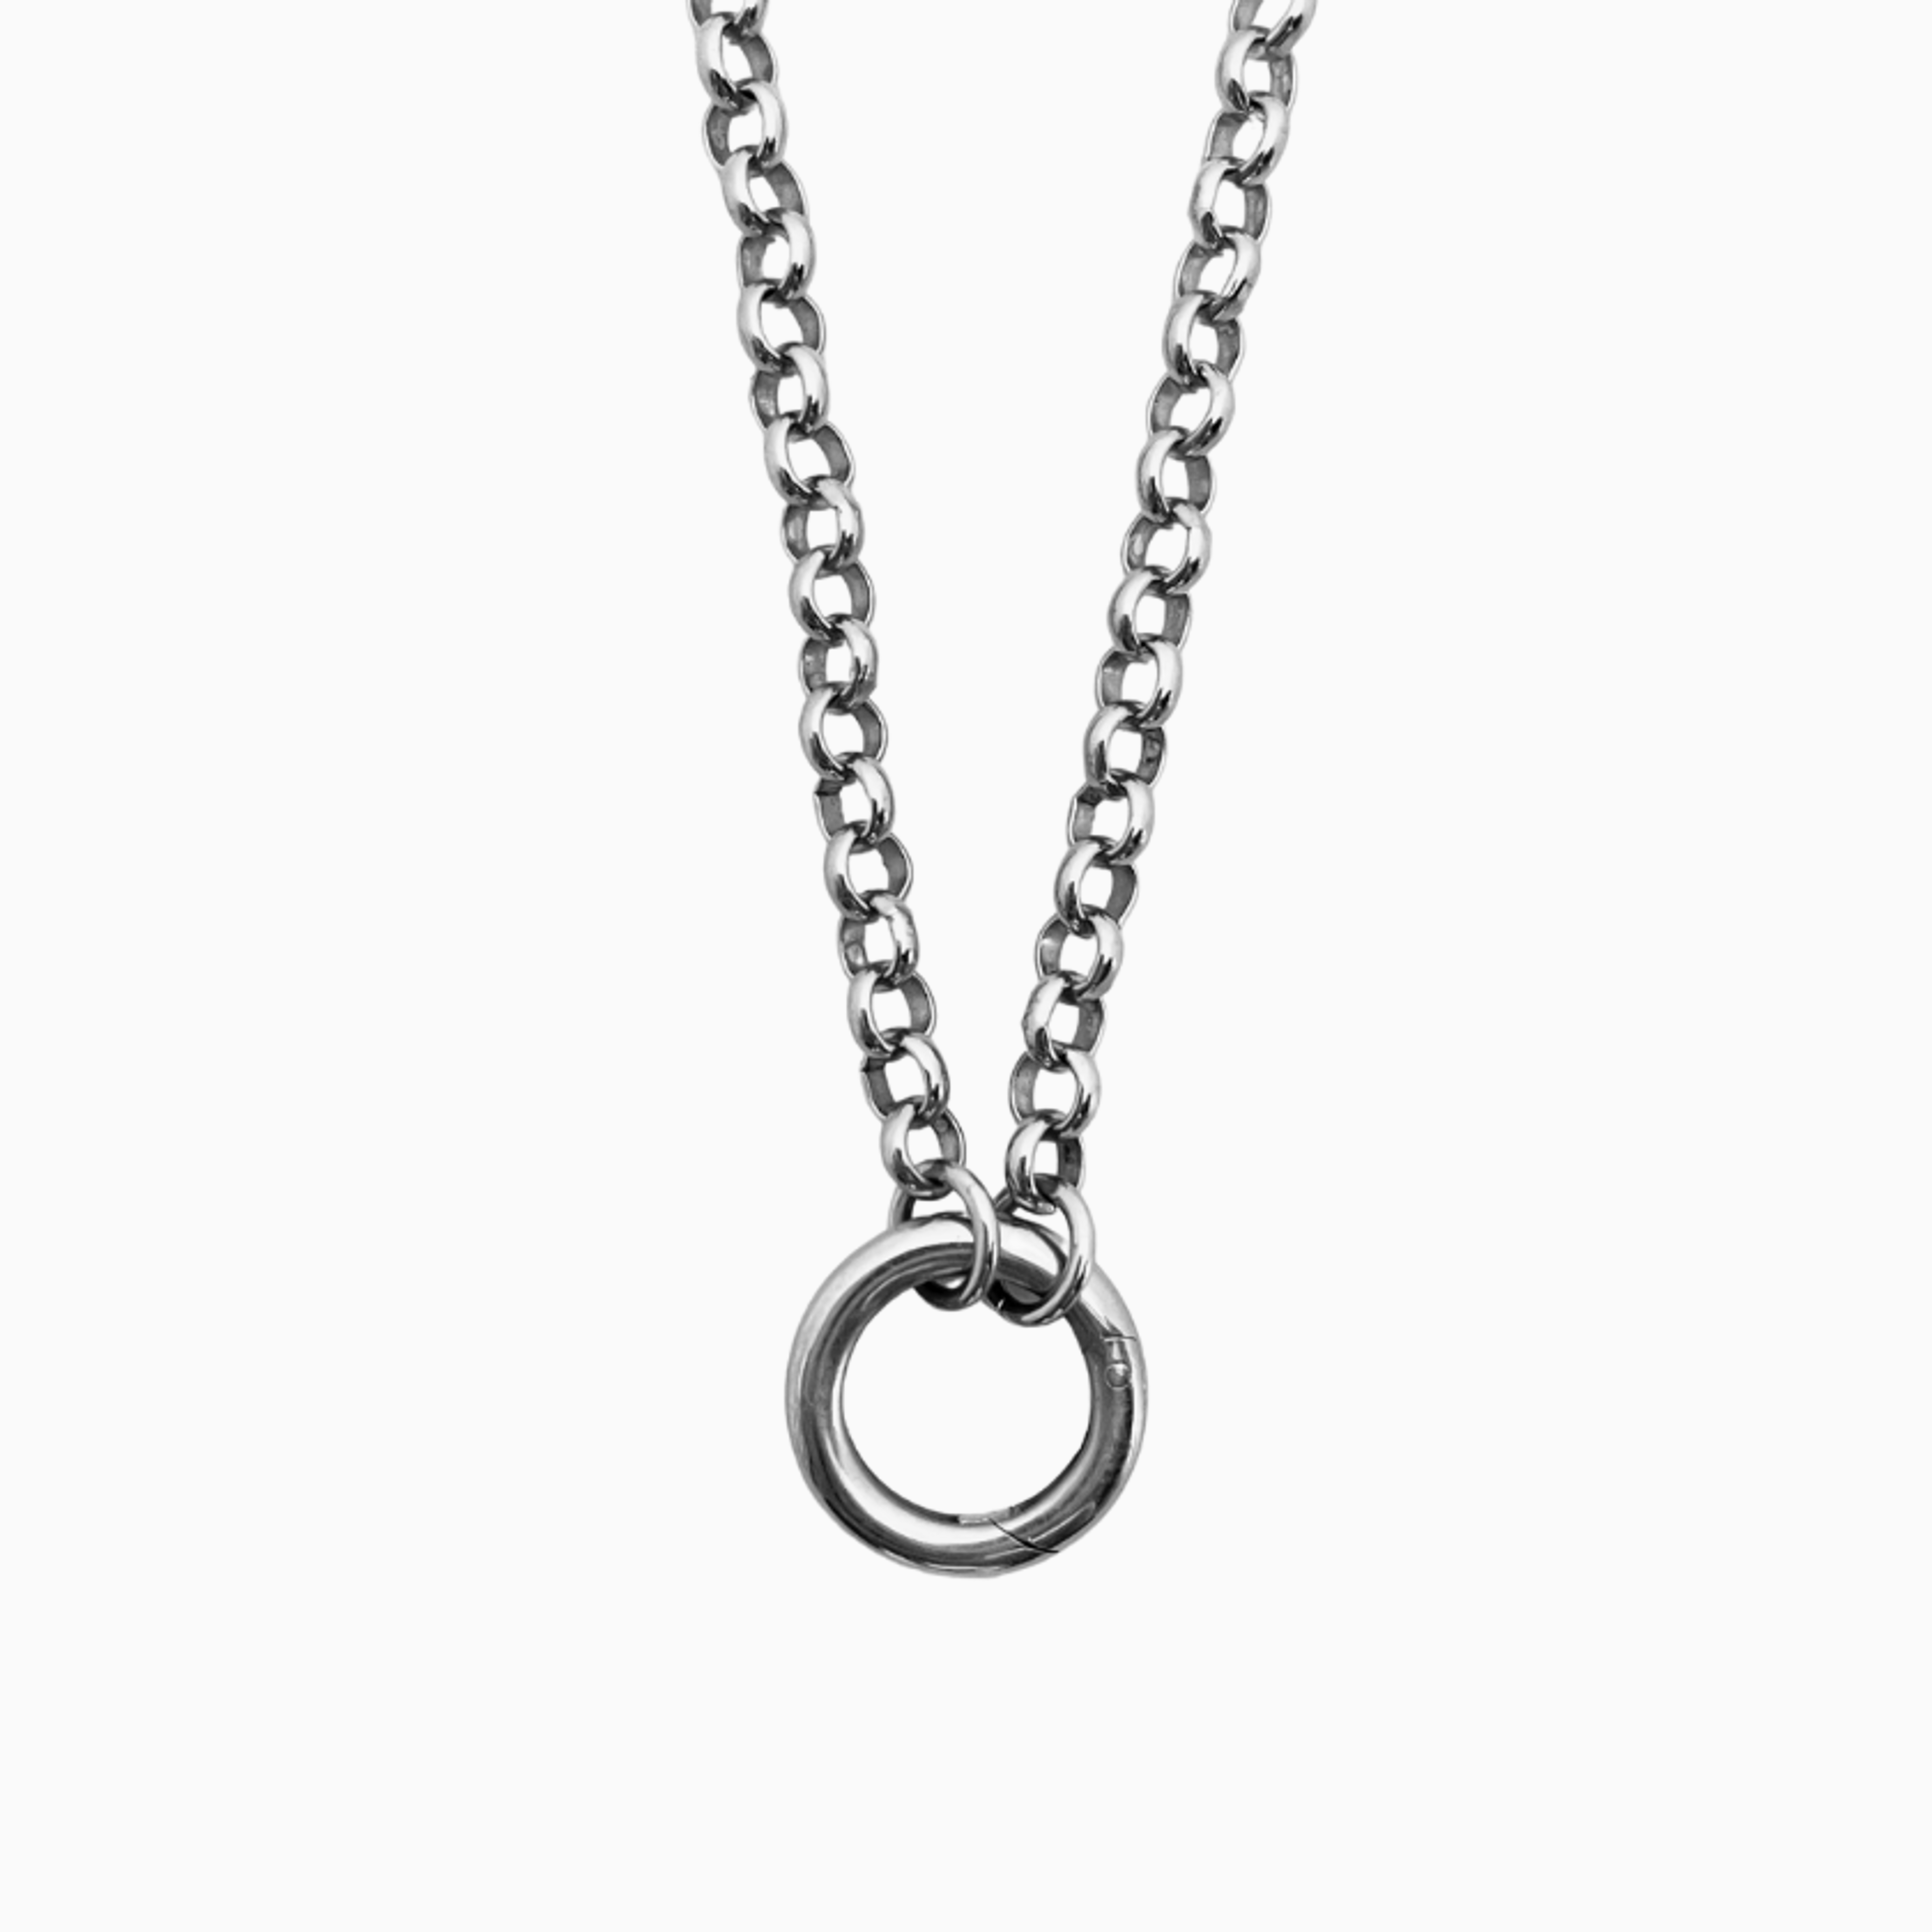 Rolo Loop Charm Necklace - 24"